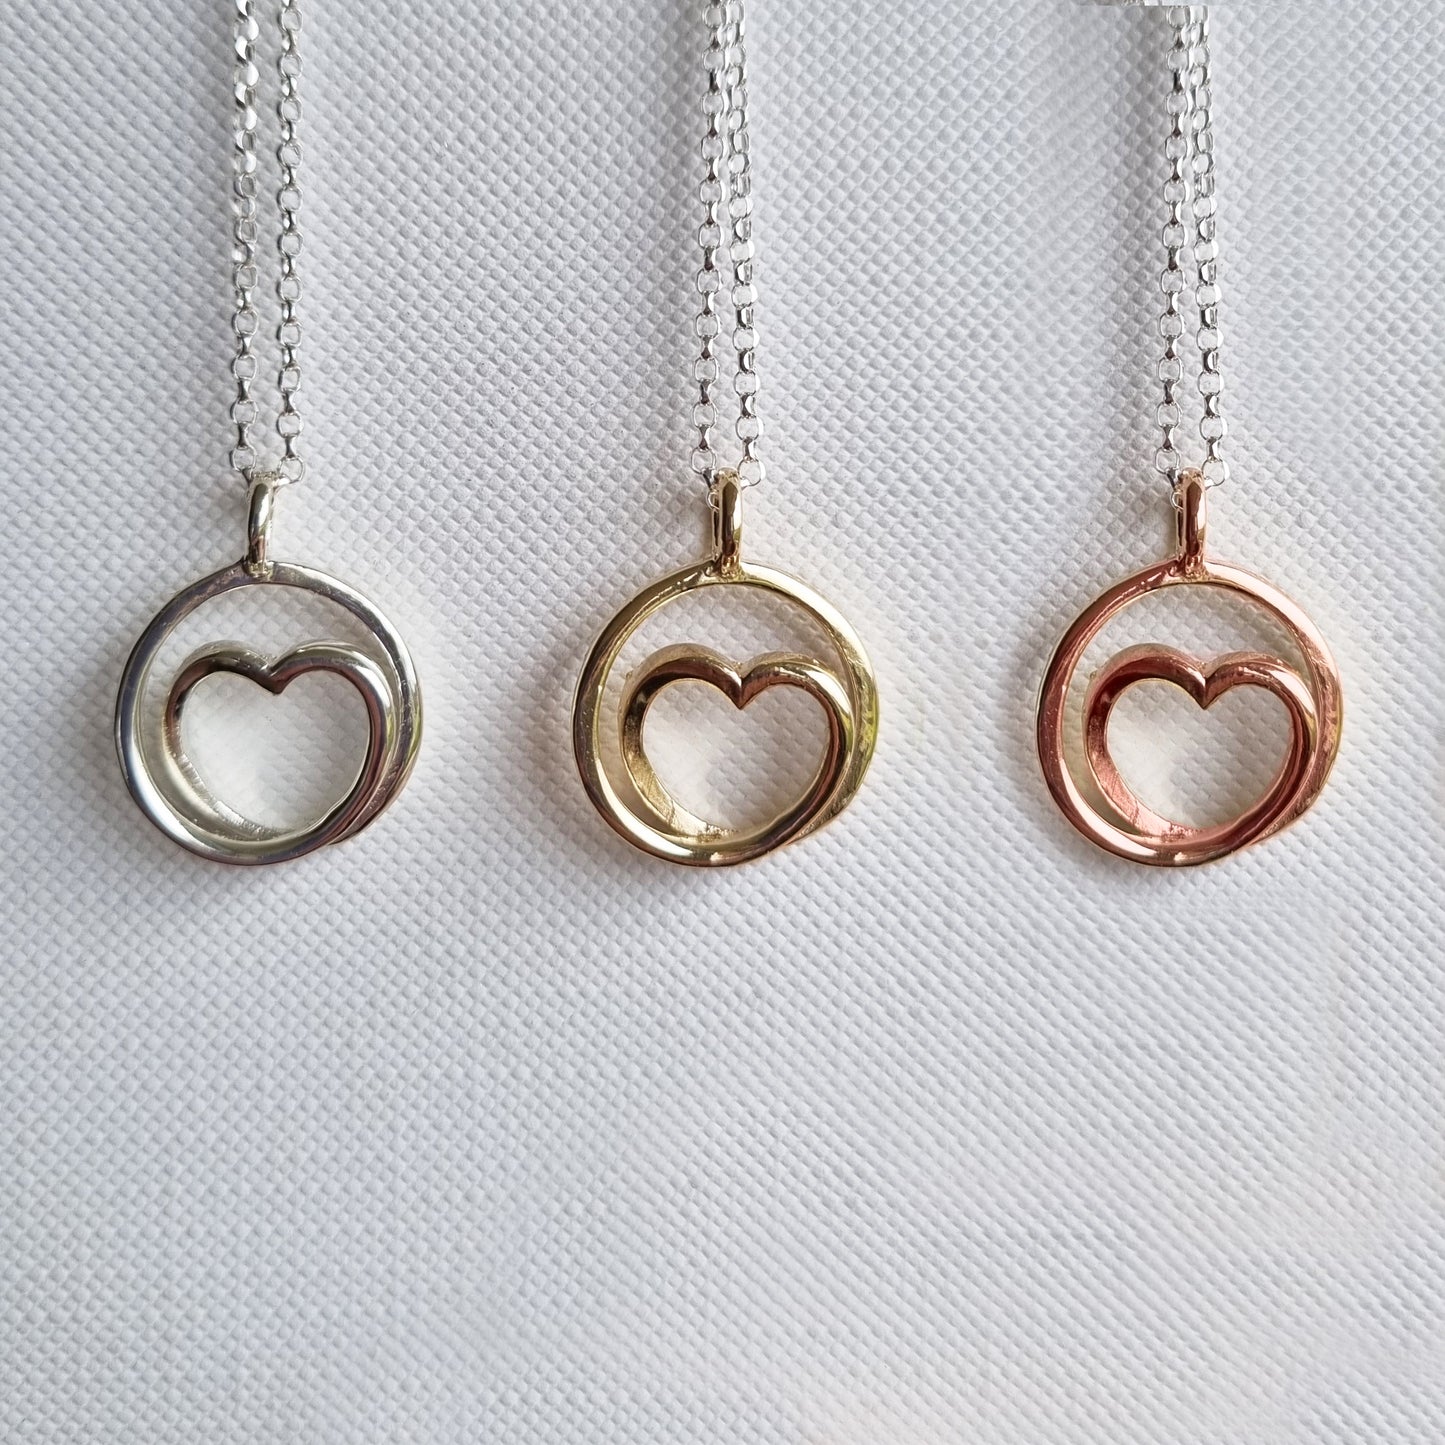 Infinite love tiny - Smallest solid gold or silver spiral necklace